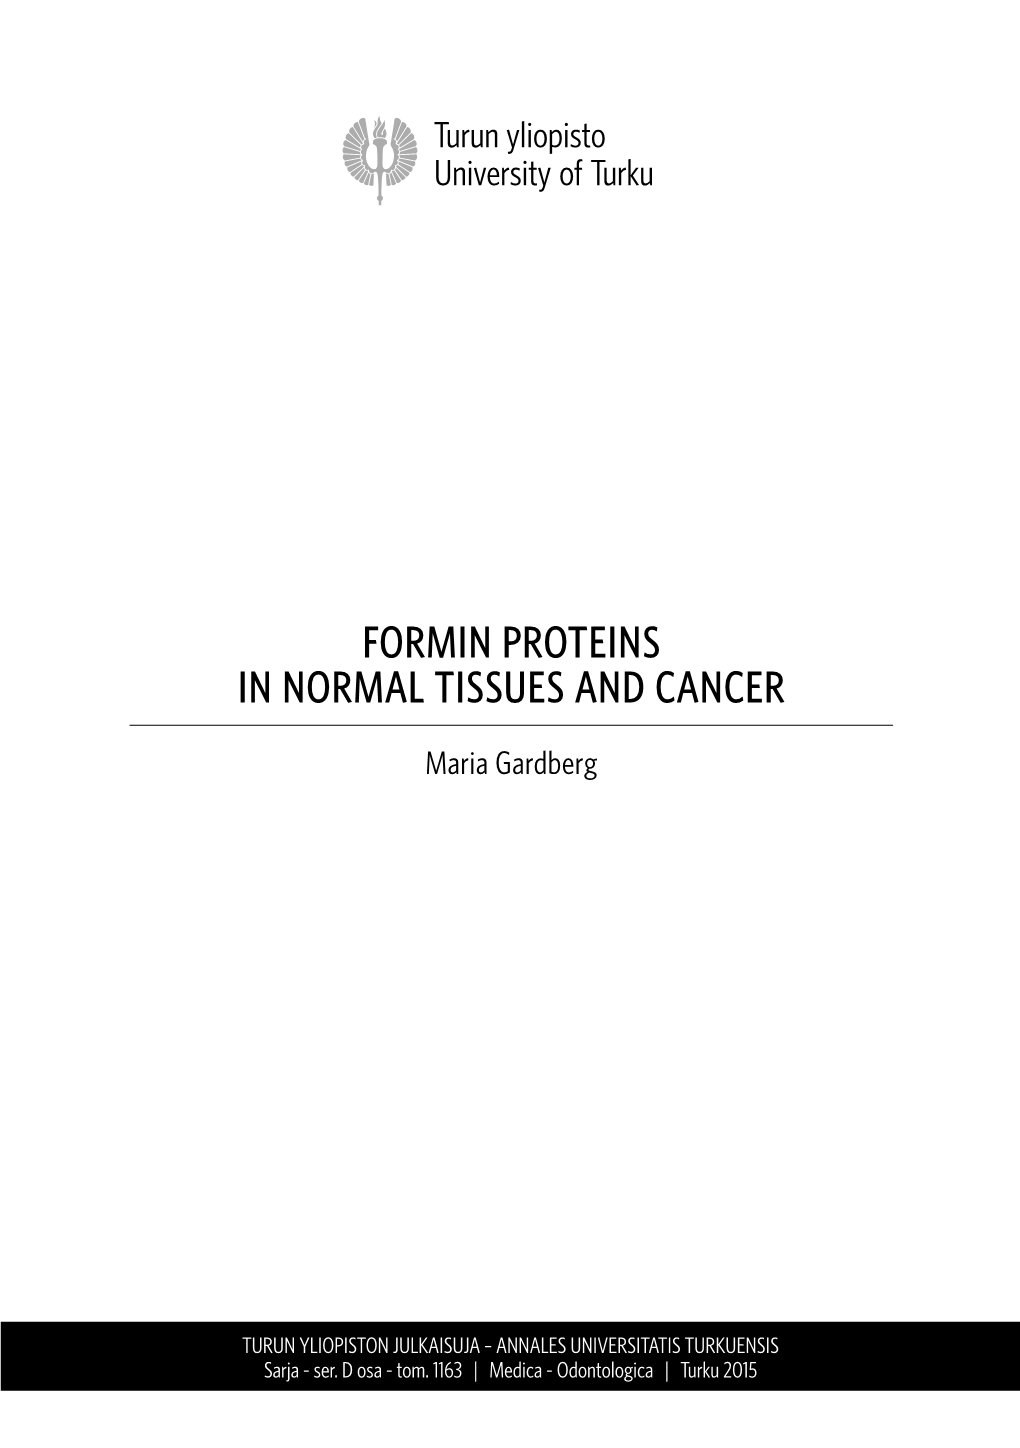 Formin Proteins in Normal Tissues and Cancer